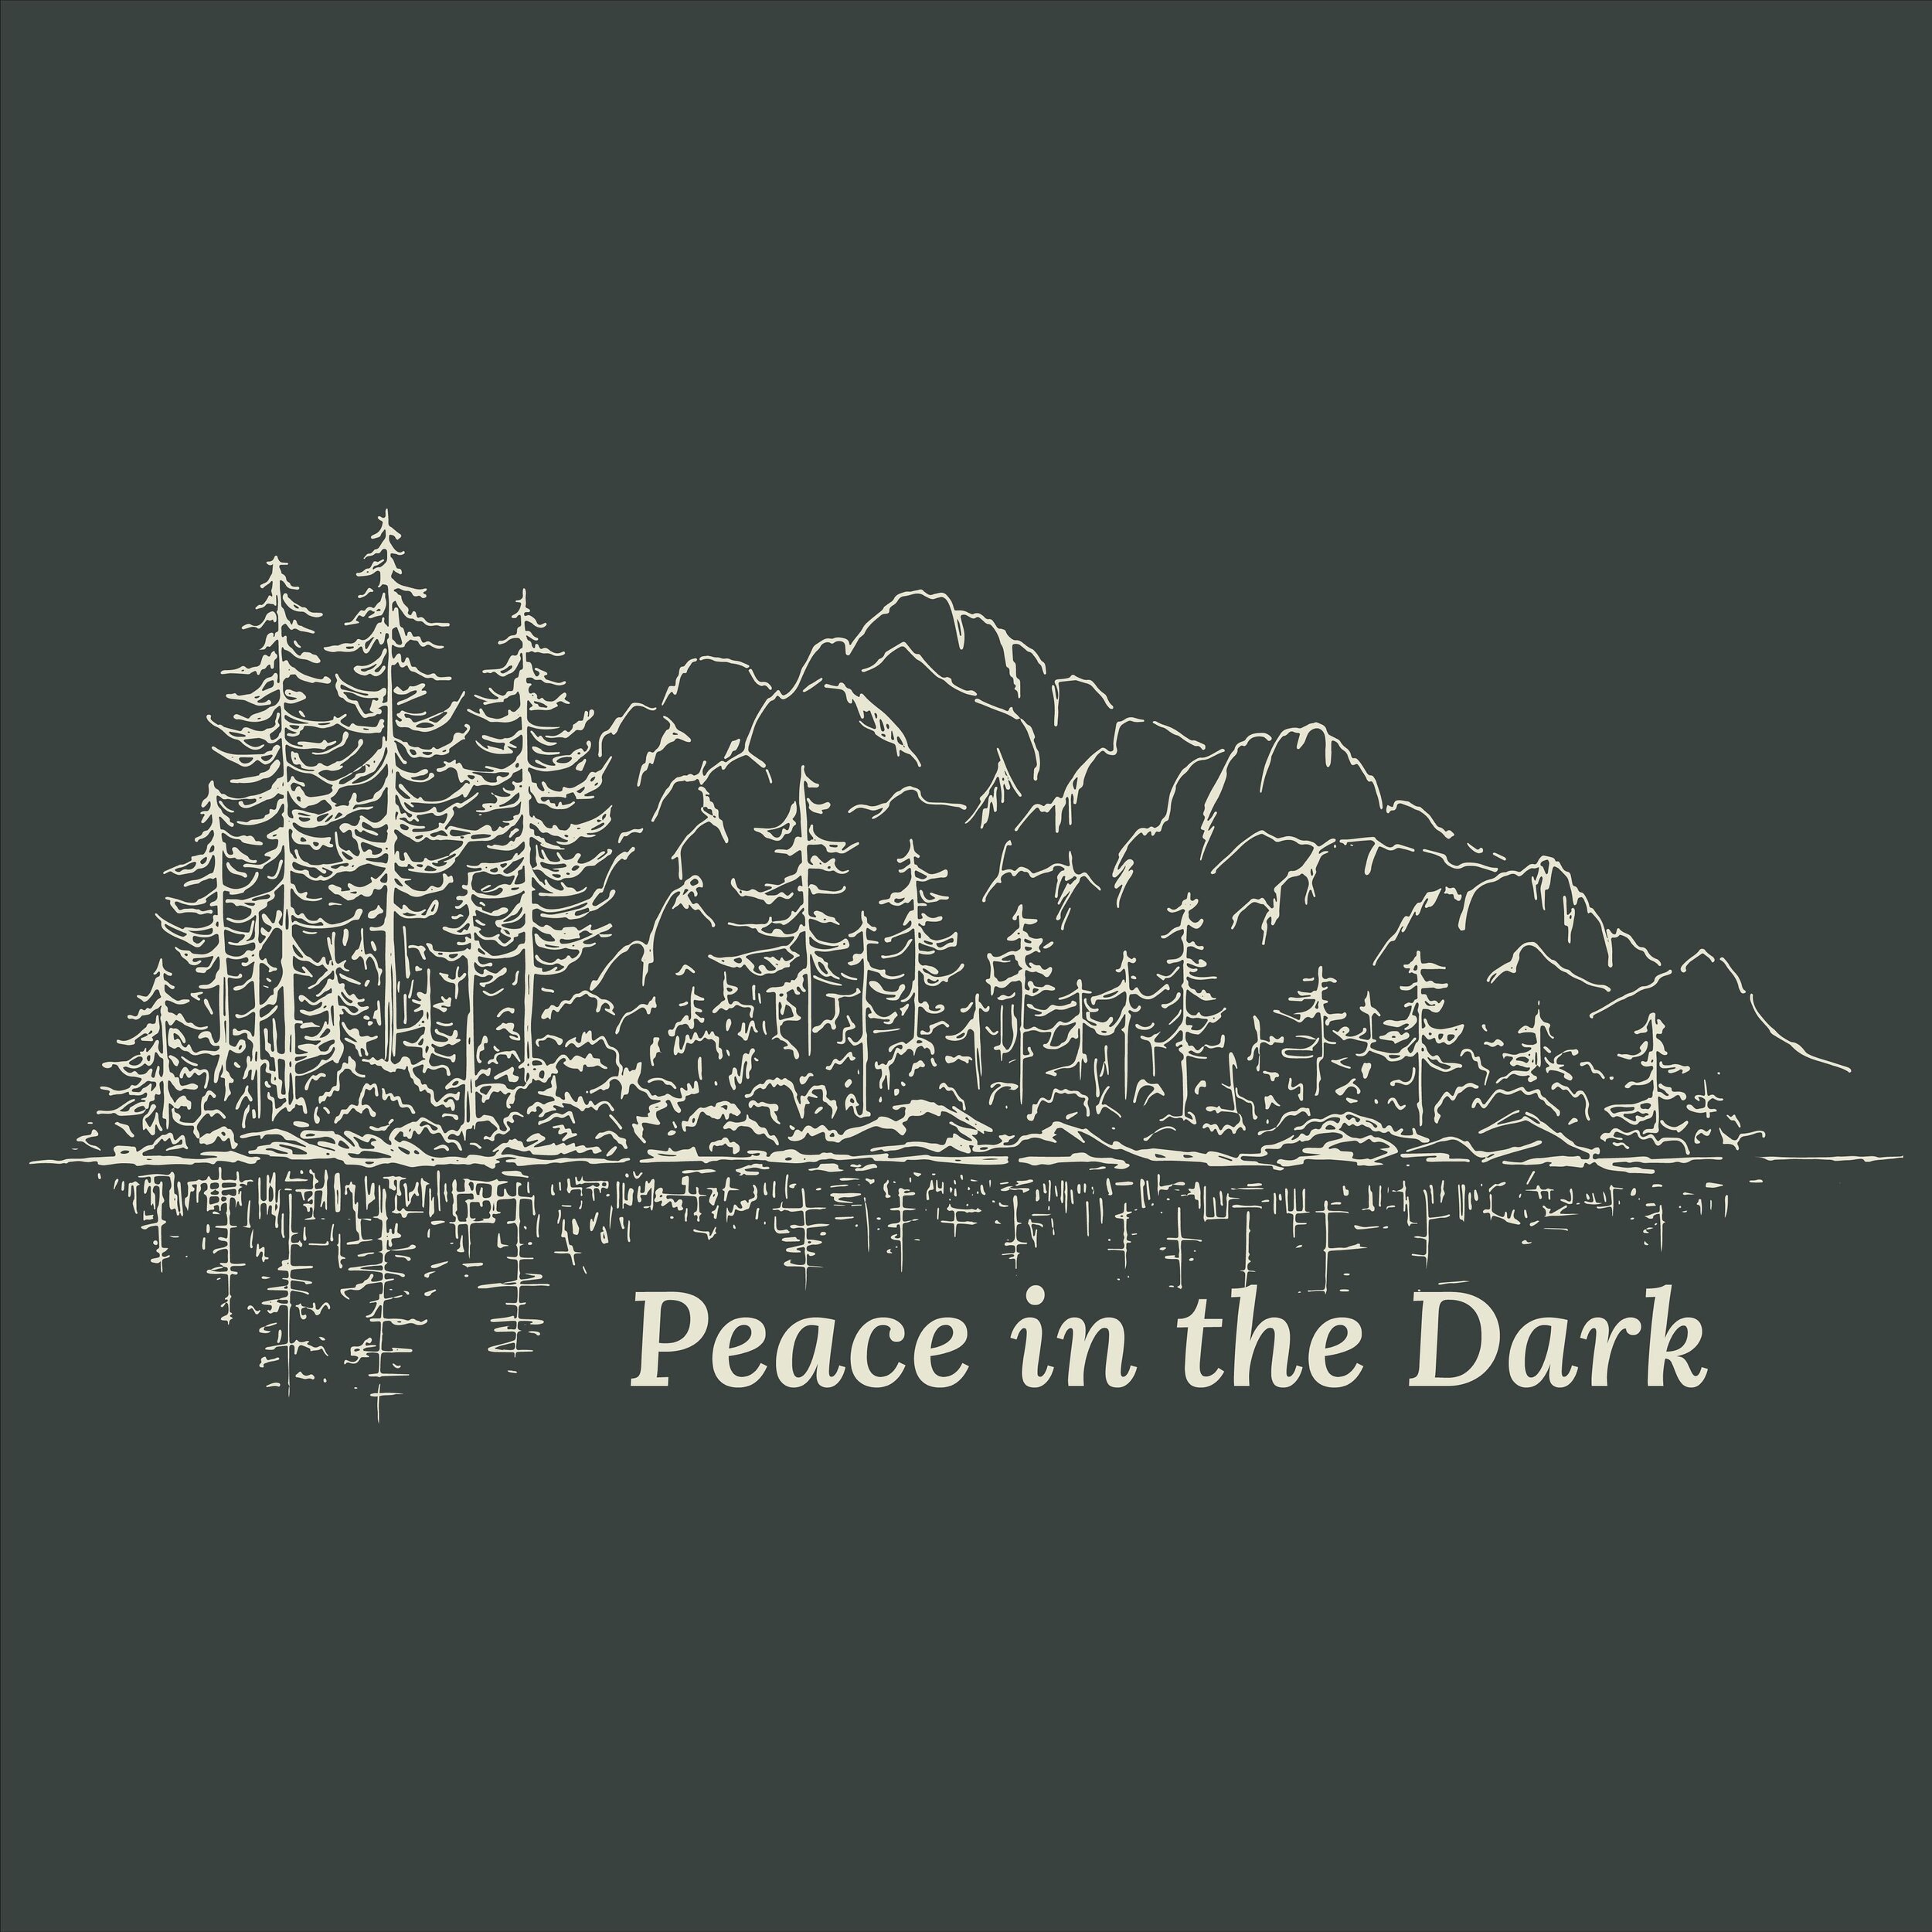 Into the dark we go. The beauty of Lent is that darkness is welcomed in a new way. Peace to us all as we wait for the light. 

Join the Lent Study of Peace in the Dark. It&rsquo;s a gentle walk through with spaciousness and room for reflection.  Join